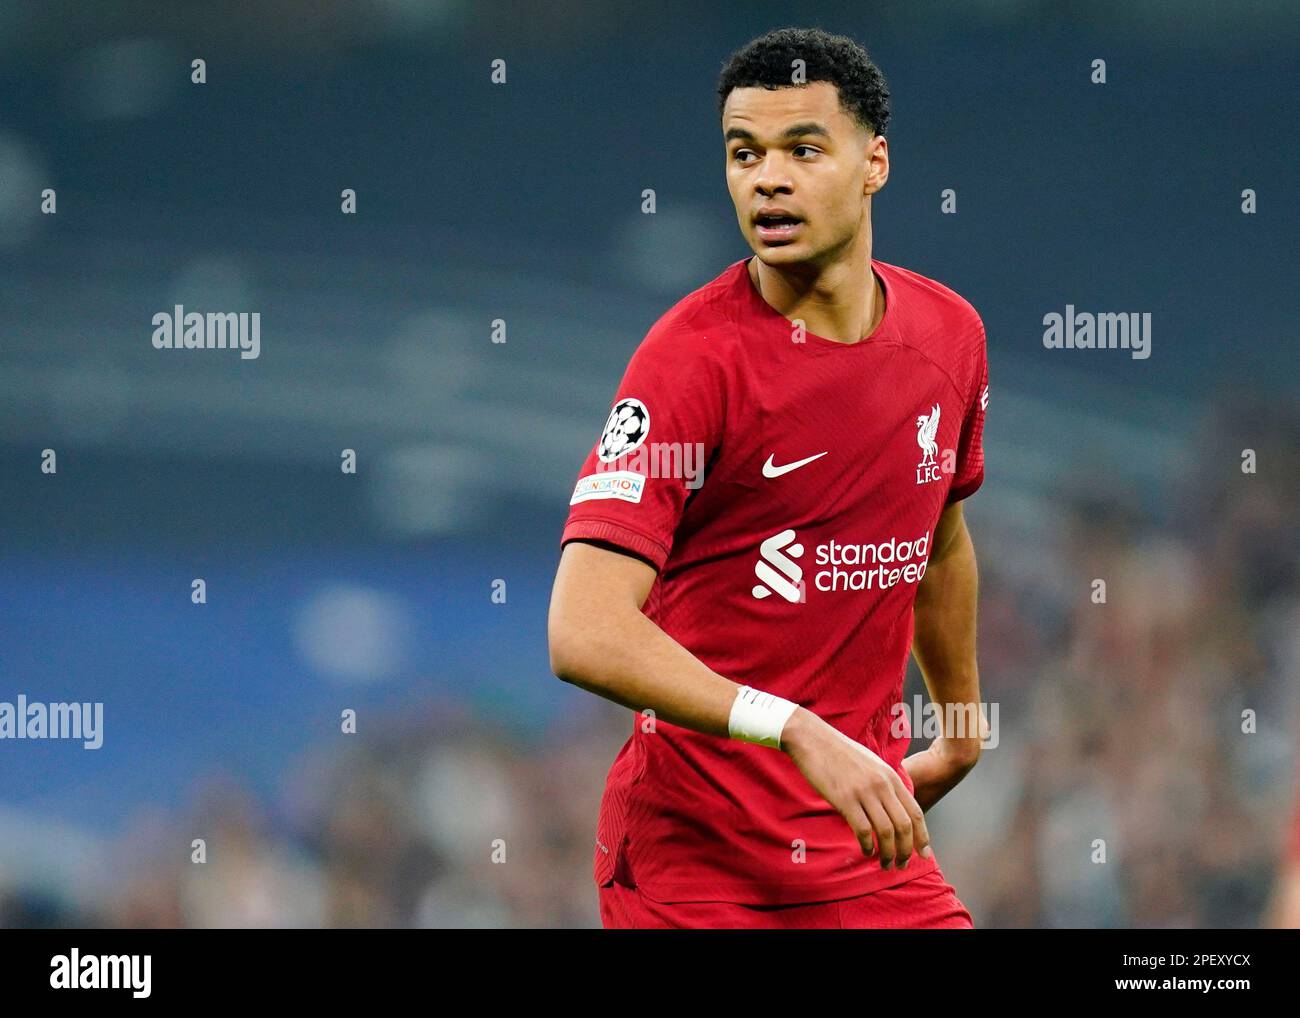 Cody Gakpo of Liverpool FC during the UEFA Champions League match, round of 16, 2nd leg between Real Madrid and Liverpool FC played at Santiago Bernabeu Stadium on March 15, 2023 in Madrid, Spain. (Photo by Colas Buera / PRESSIN) Stock Photo